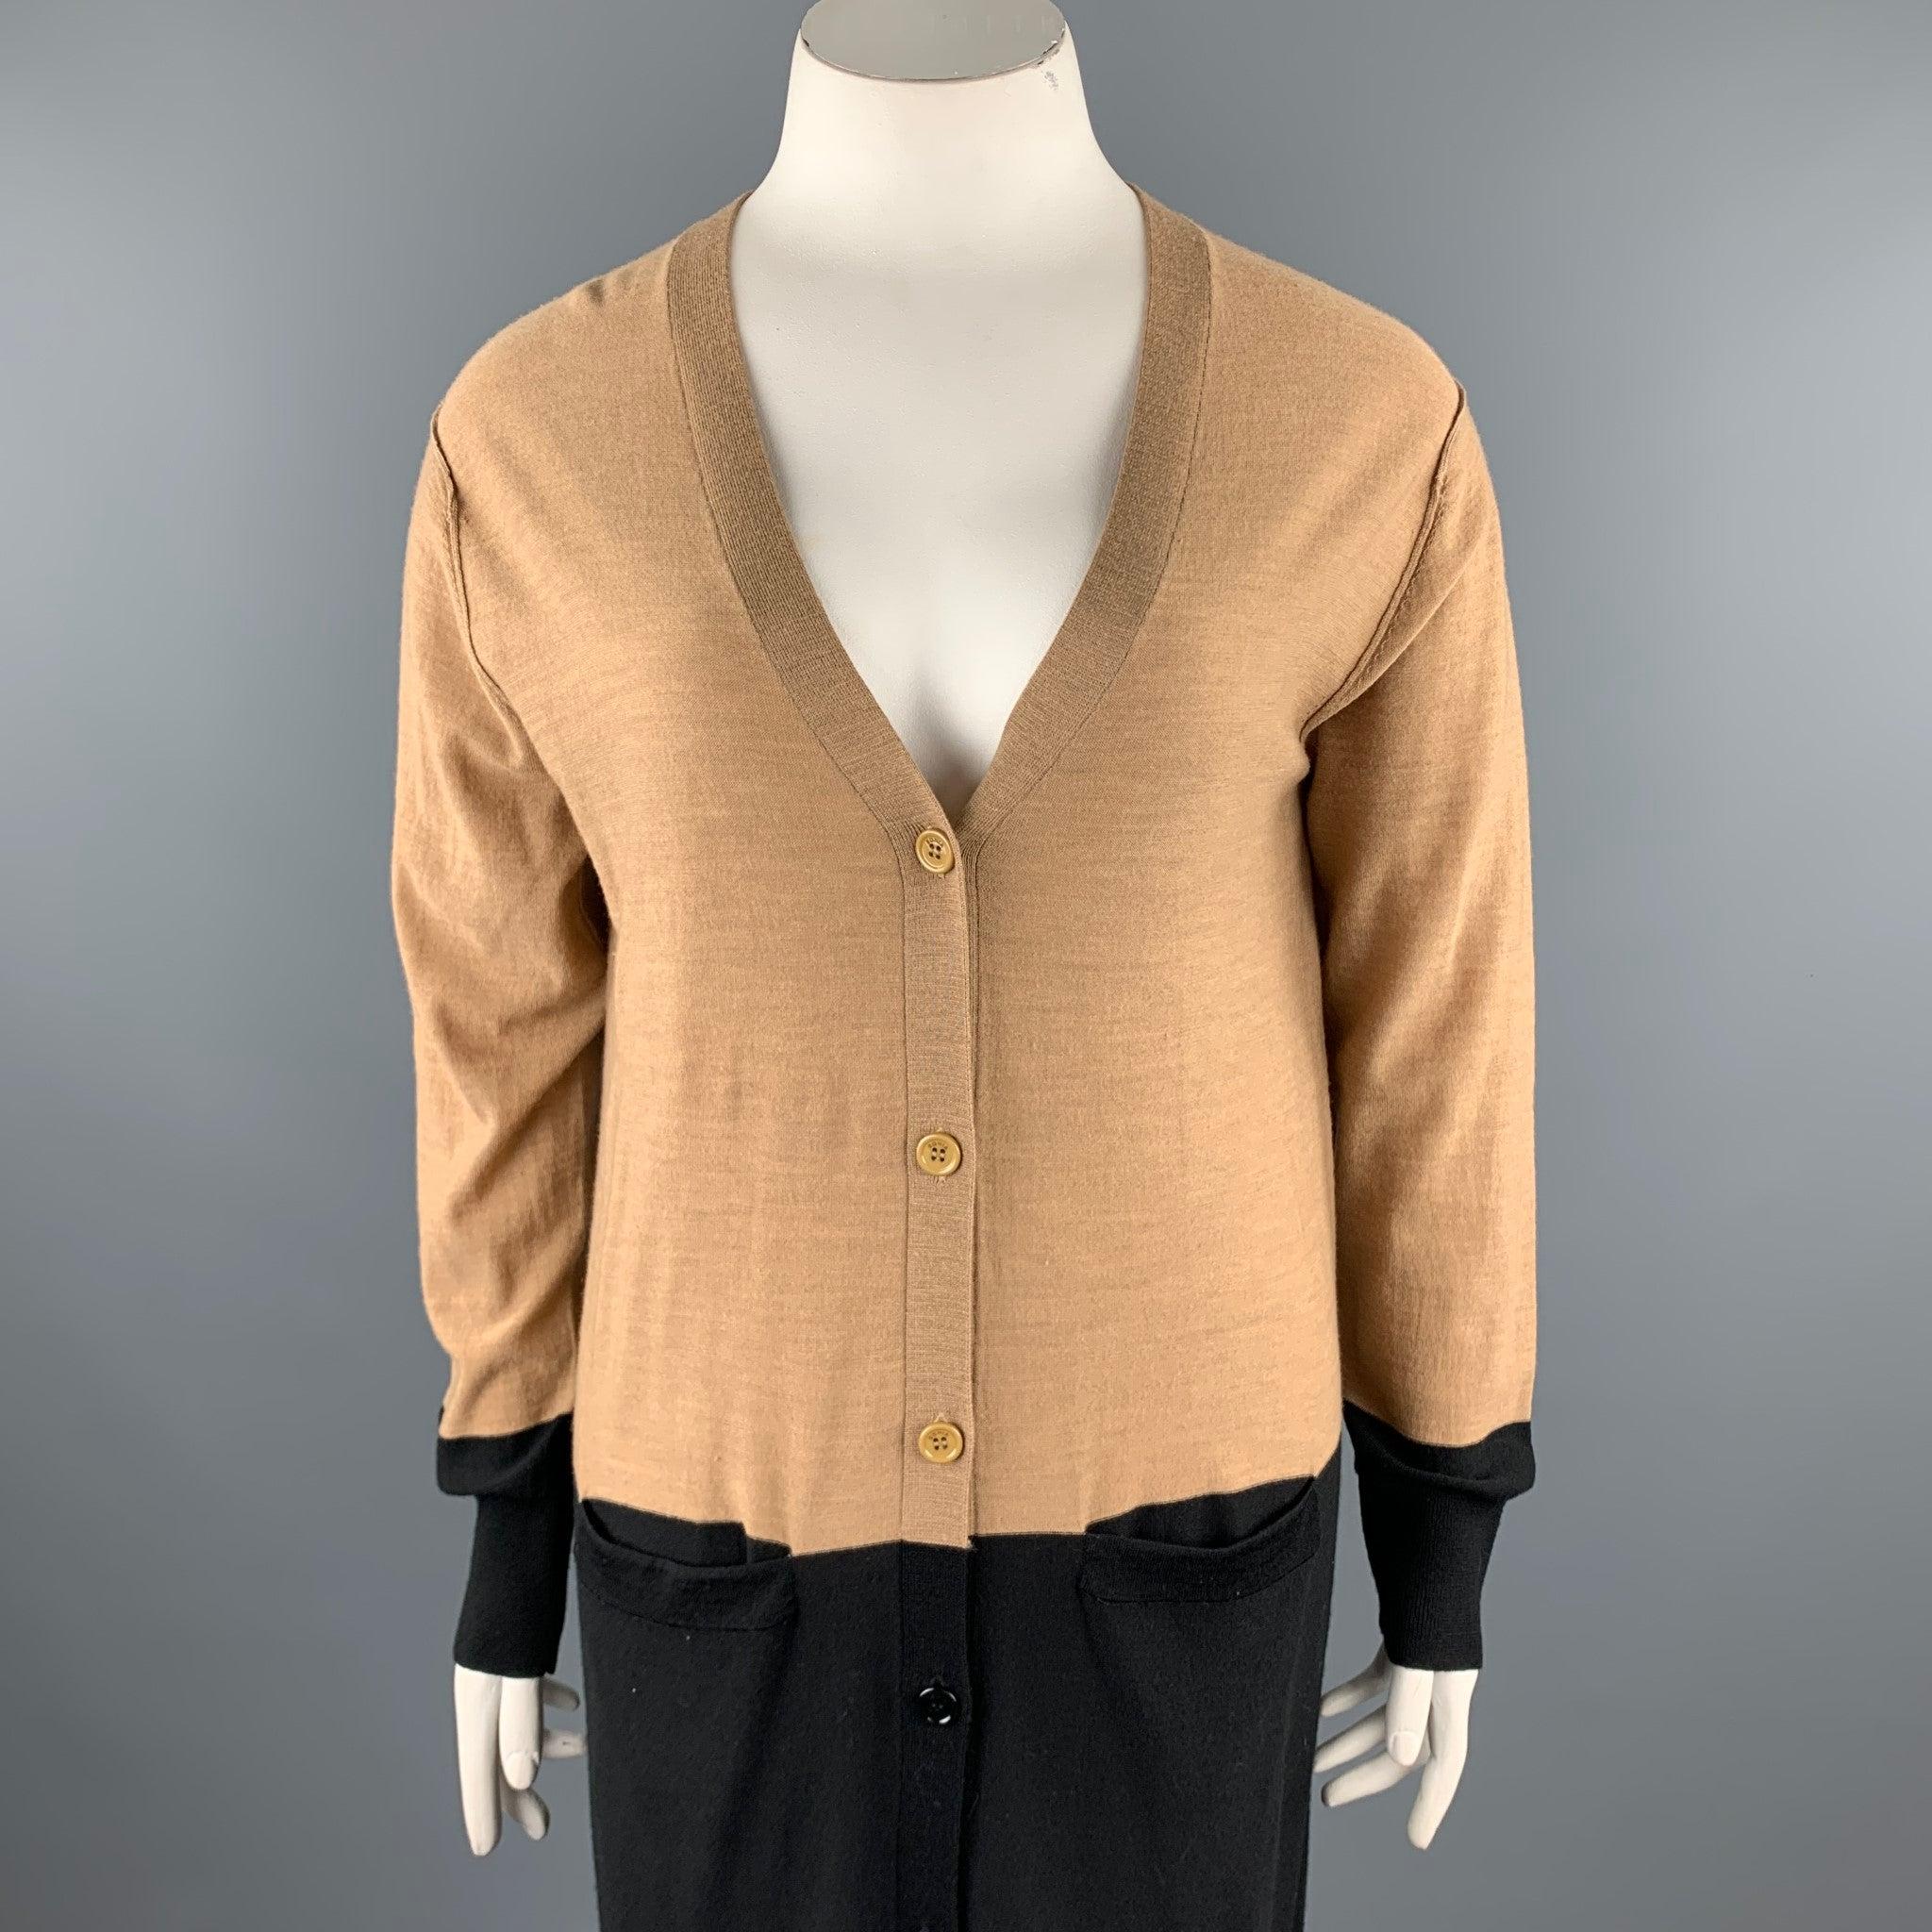 SONIA RYKIEL cardigan comes in a black & beige knitted color block wool featuring front pockets and a buttoned closure.Very Good
Pre-Owned Condition. 

Marked:   L 

Measurements: 
 
Shoulder: 19 inches 
Bust: 42 inches 
Sleeve: 25 inches 
Length: